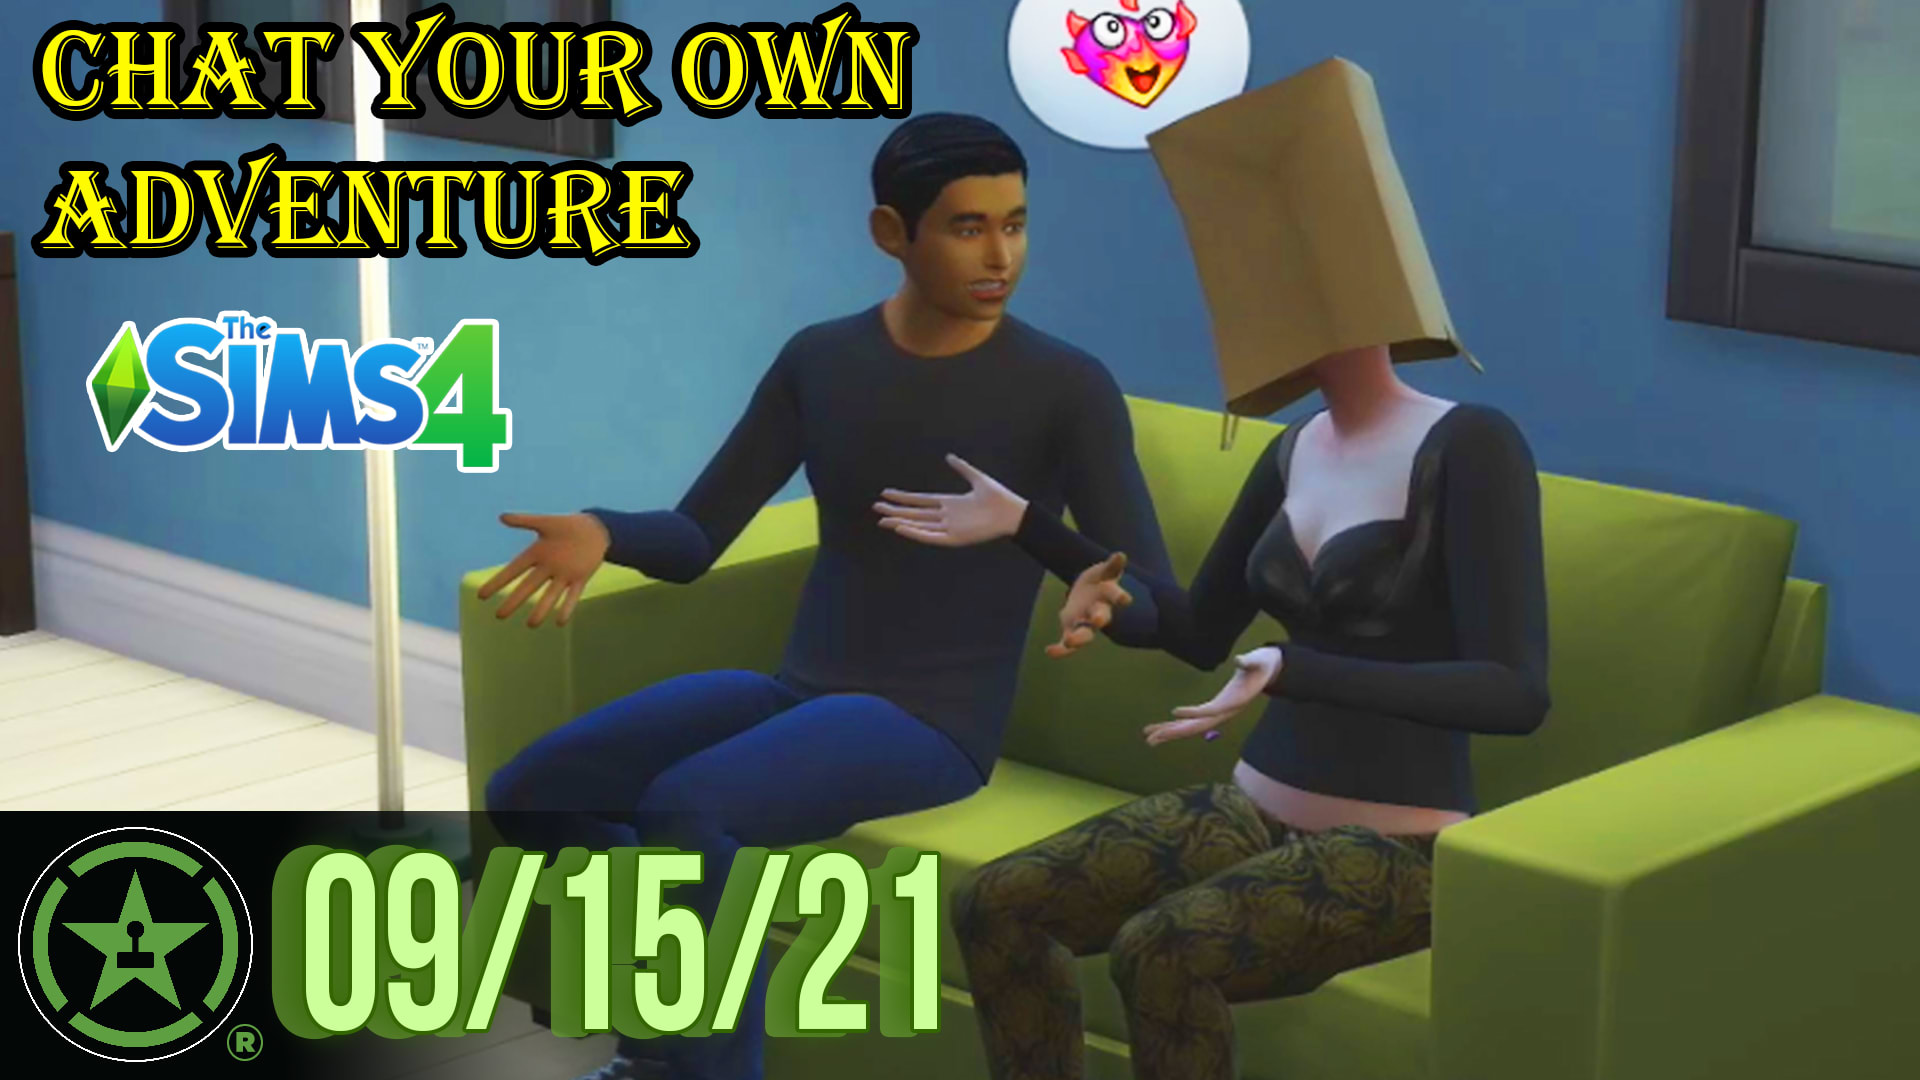 Sims 4 live chat